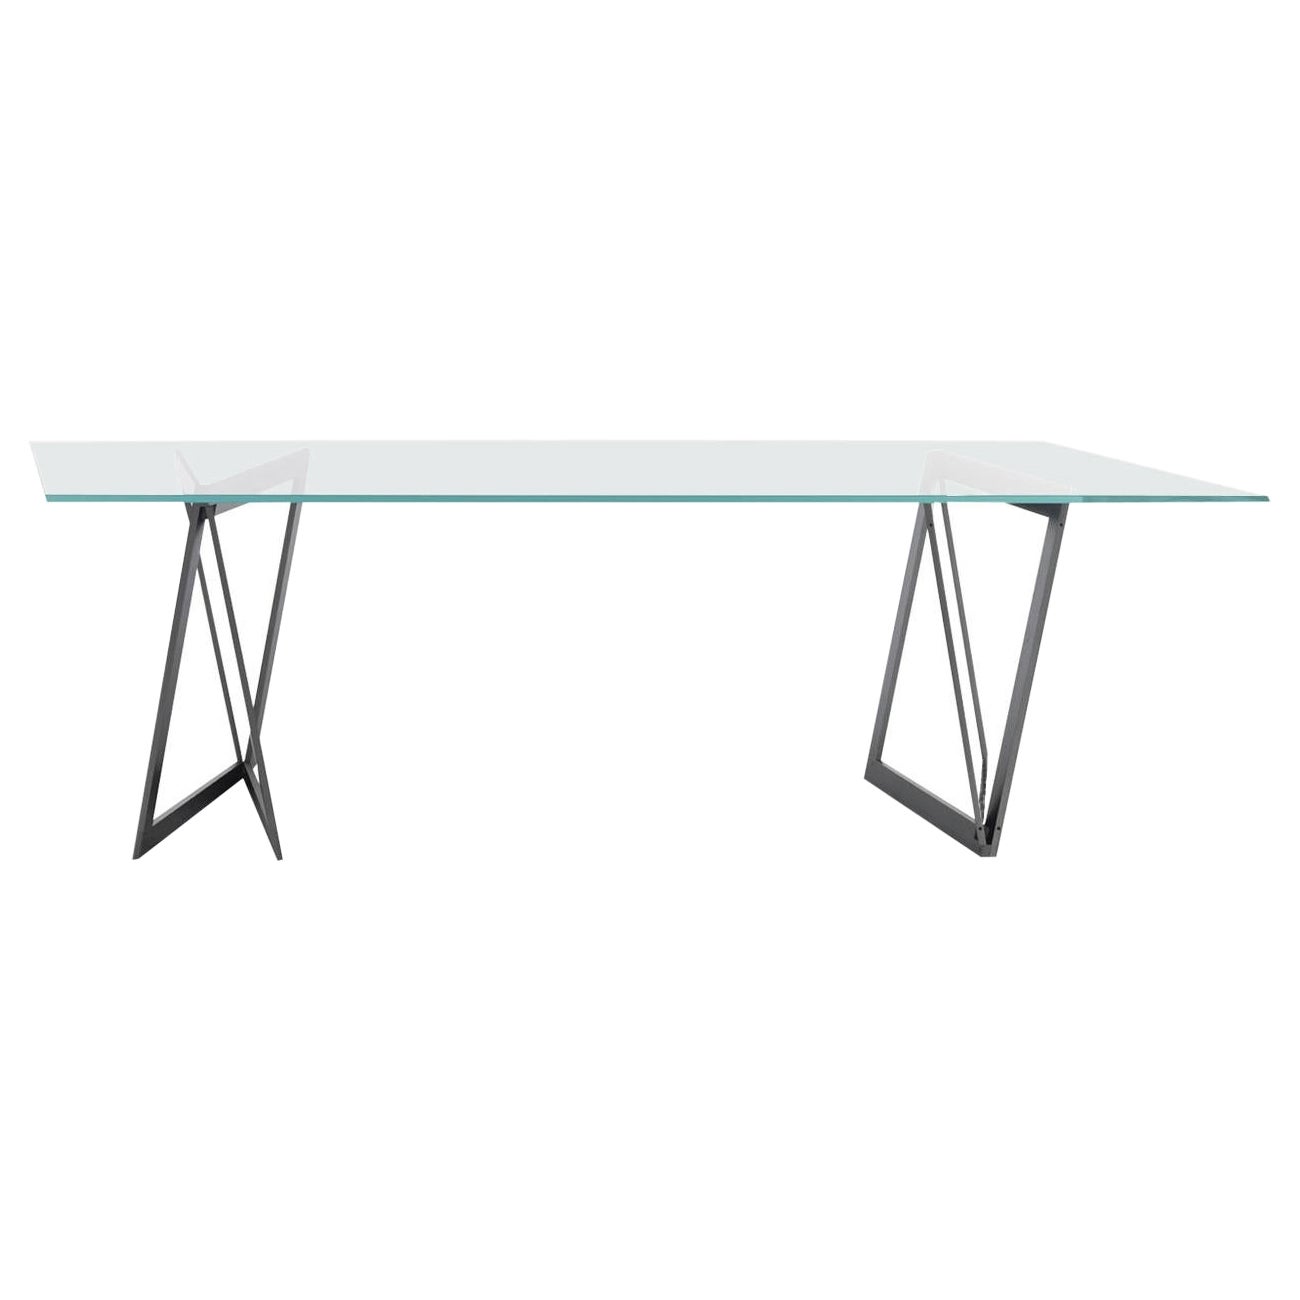 QuaDror 02 Dining Table by Dror For Sale